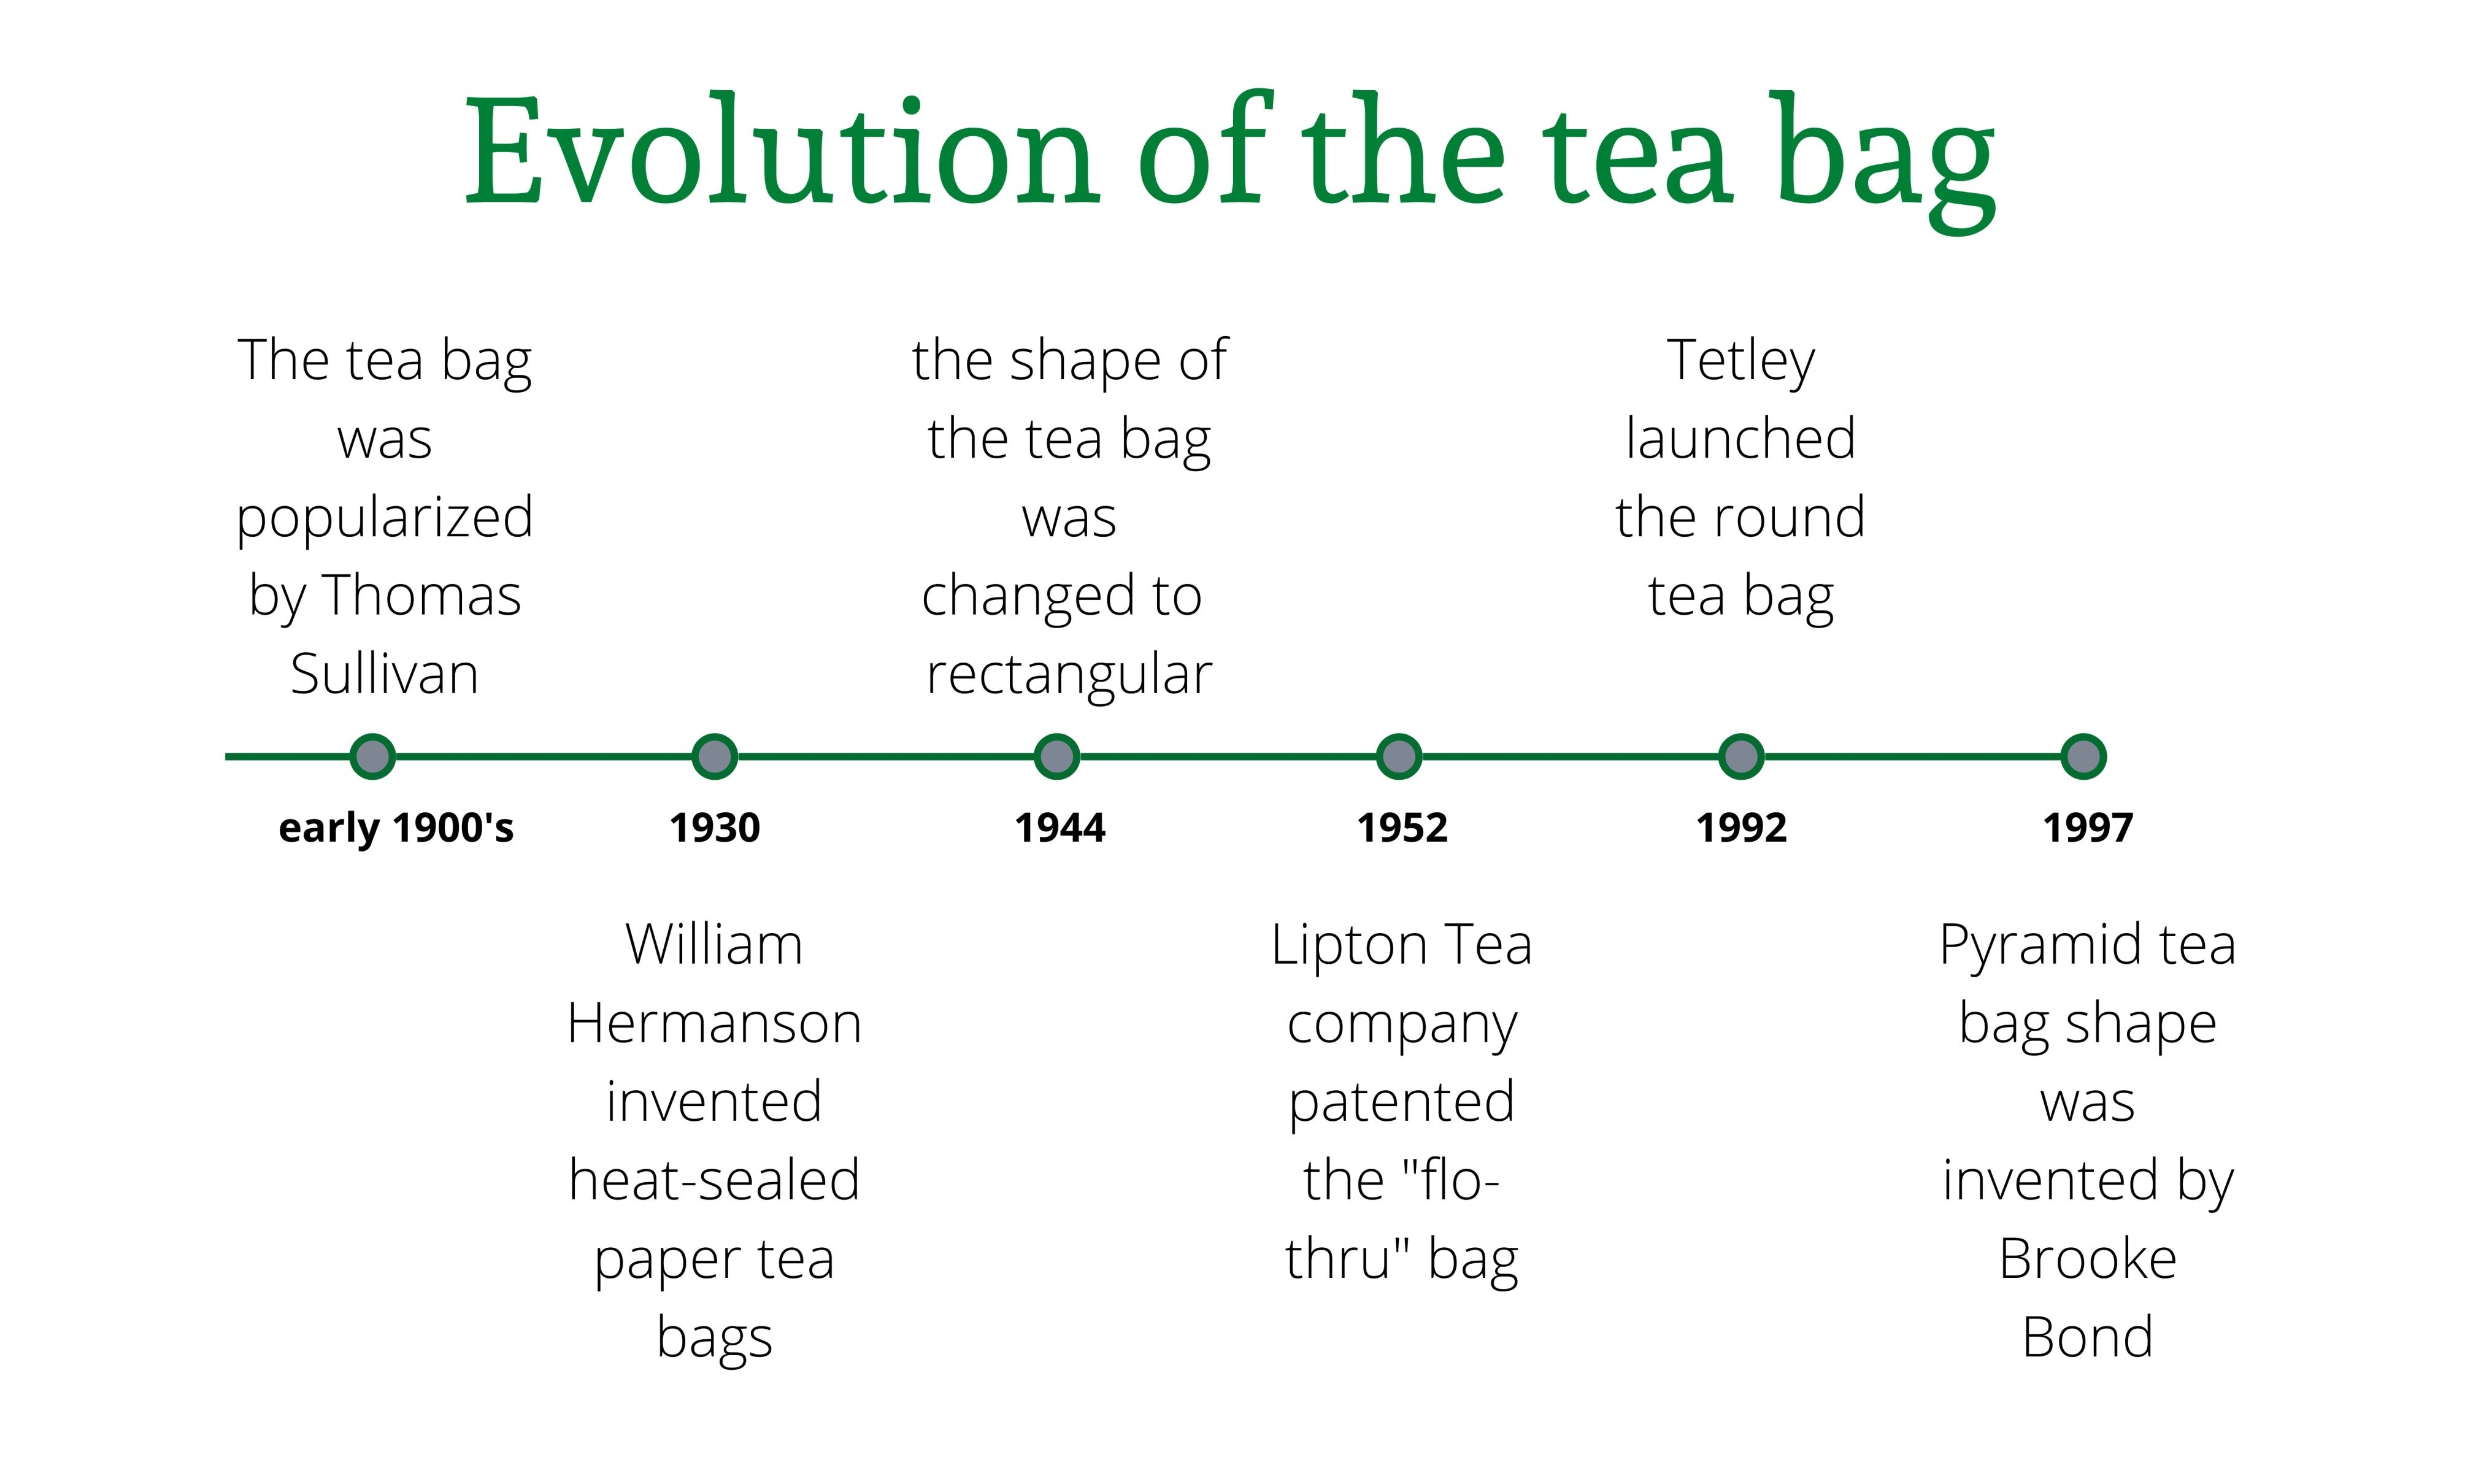 Timeline of the evolution of the teabag from 1900 to 2000